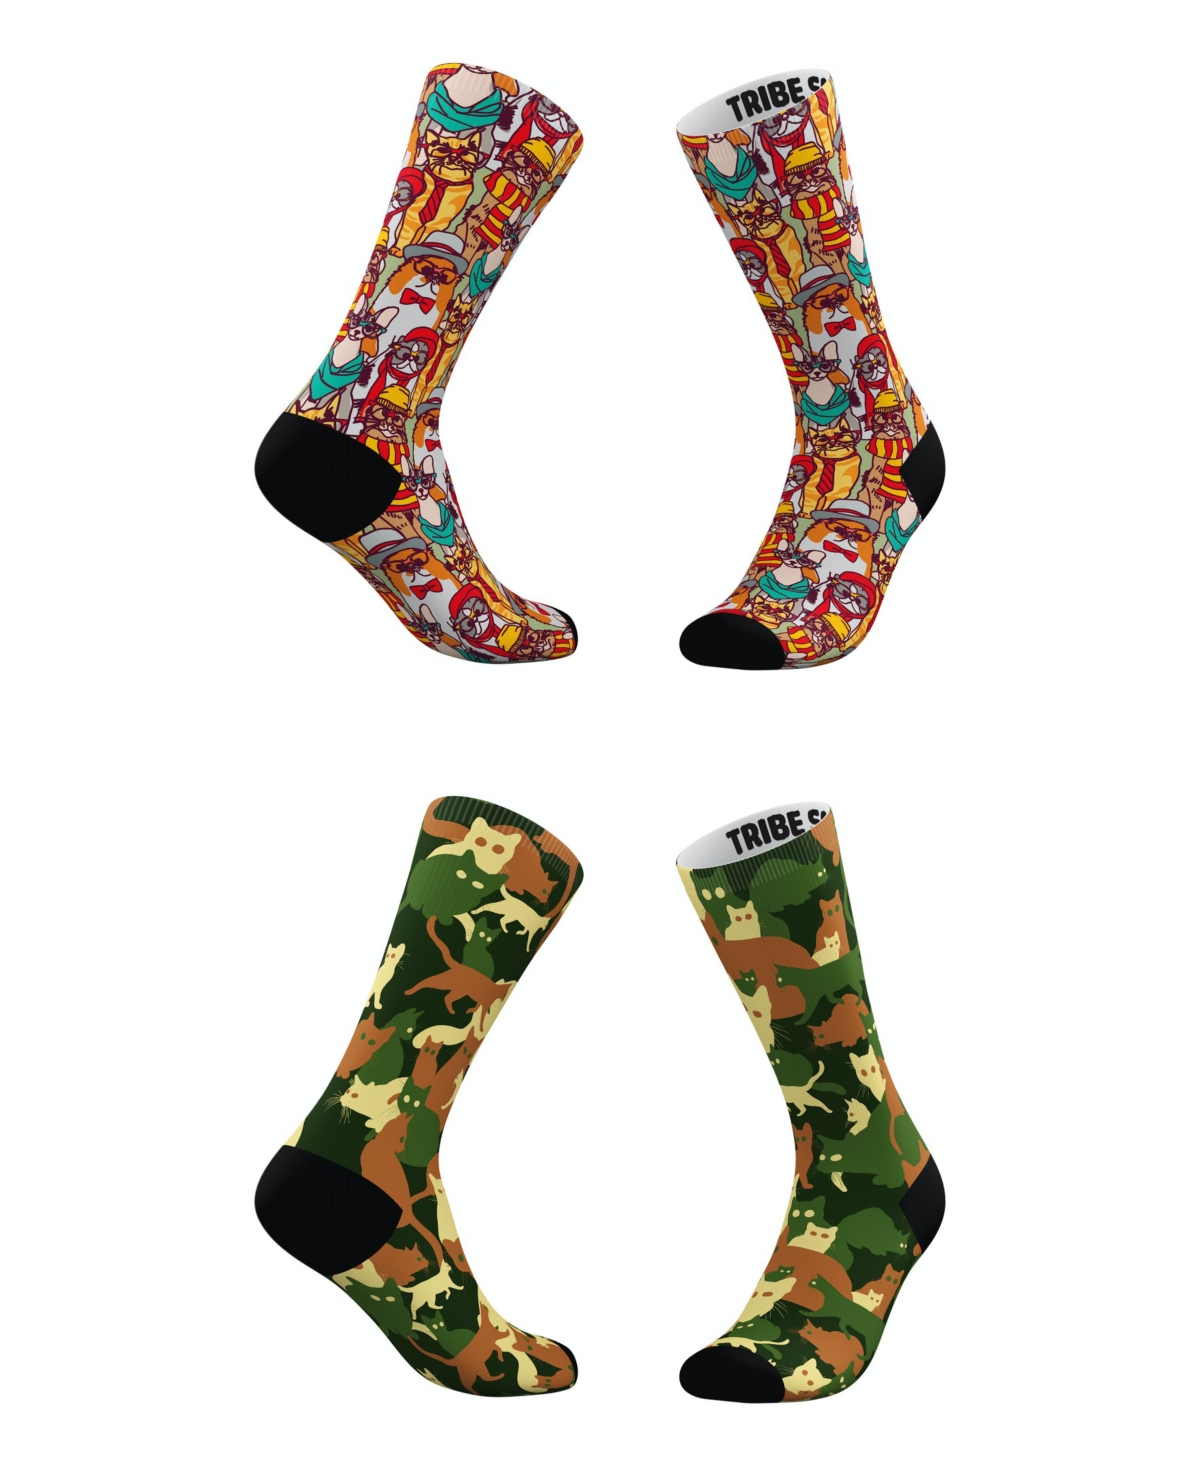 Men's and Women's Hipster Cat-Moflage Socks, Set of 2 - Assorted Pre-Pack